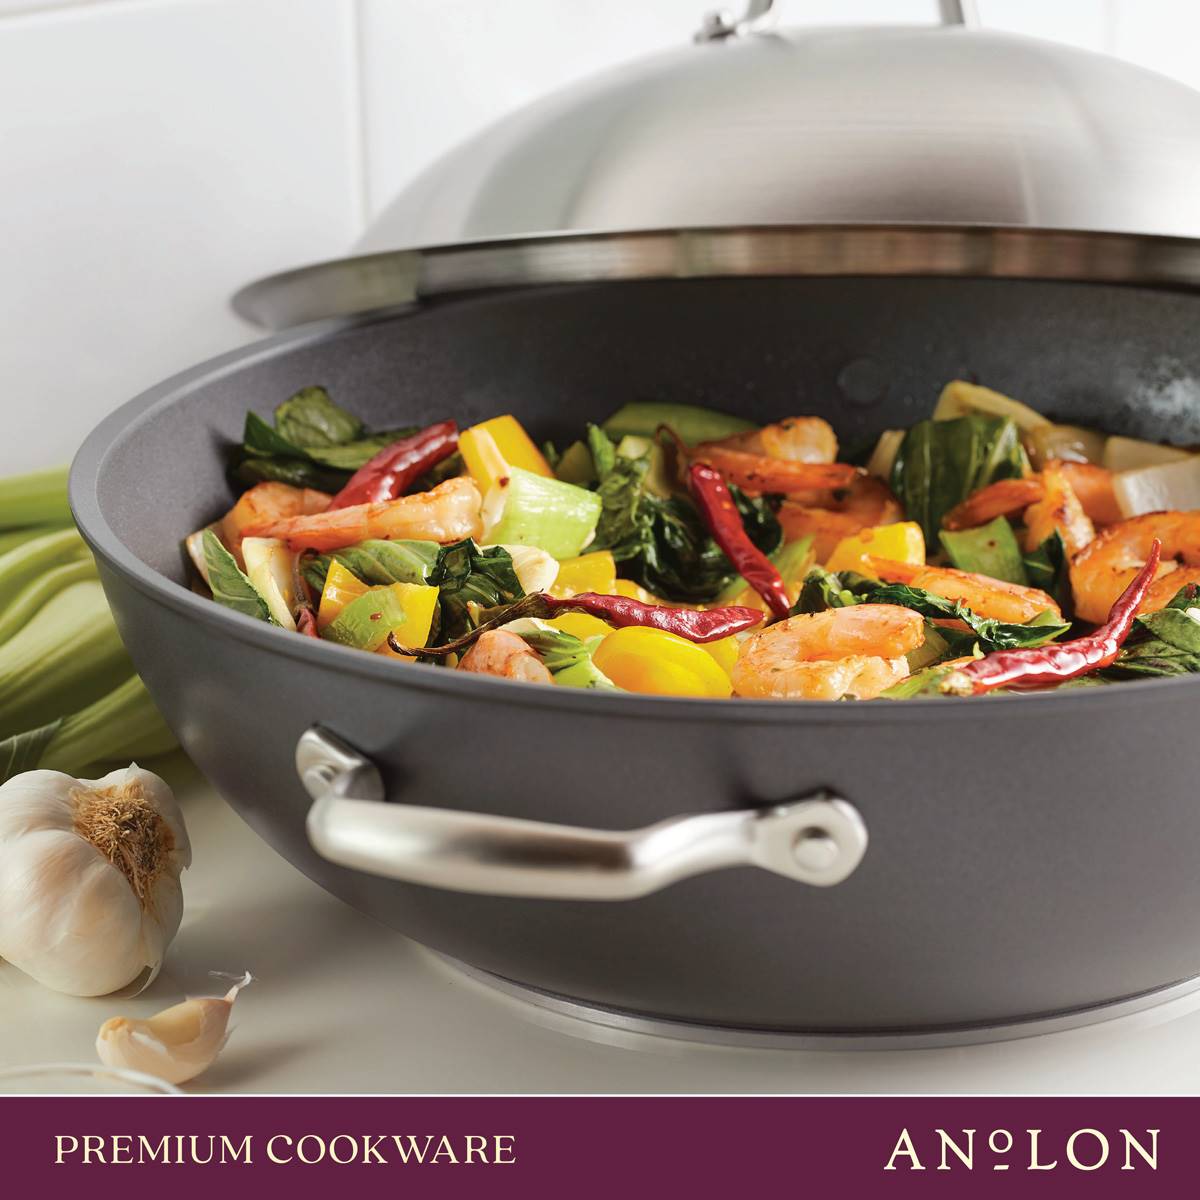 Anolon(R) Accolade 13.5in. Hard-Anodized Nonstick Wok